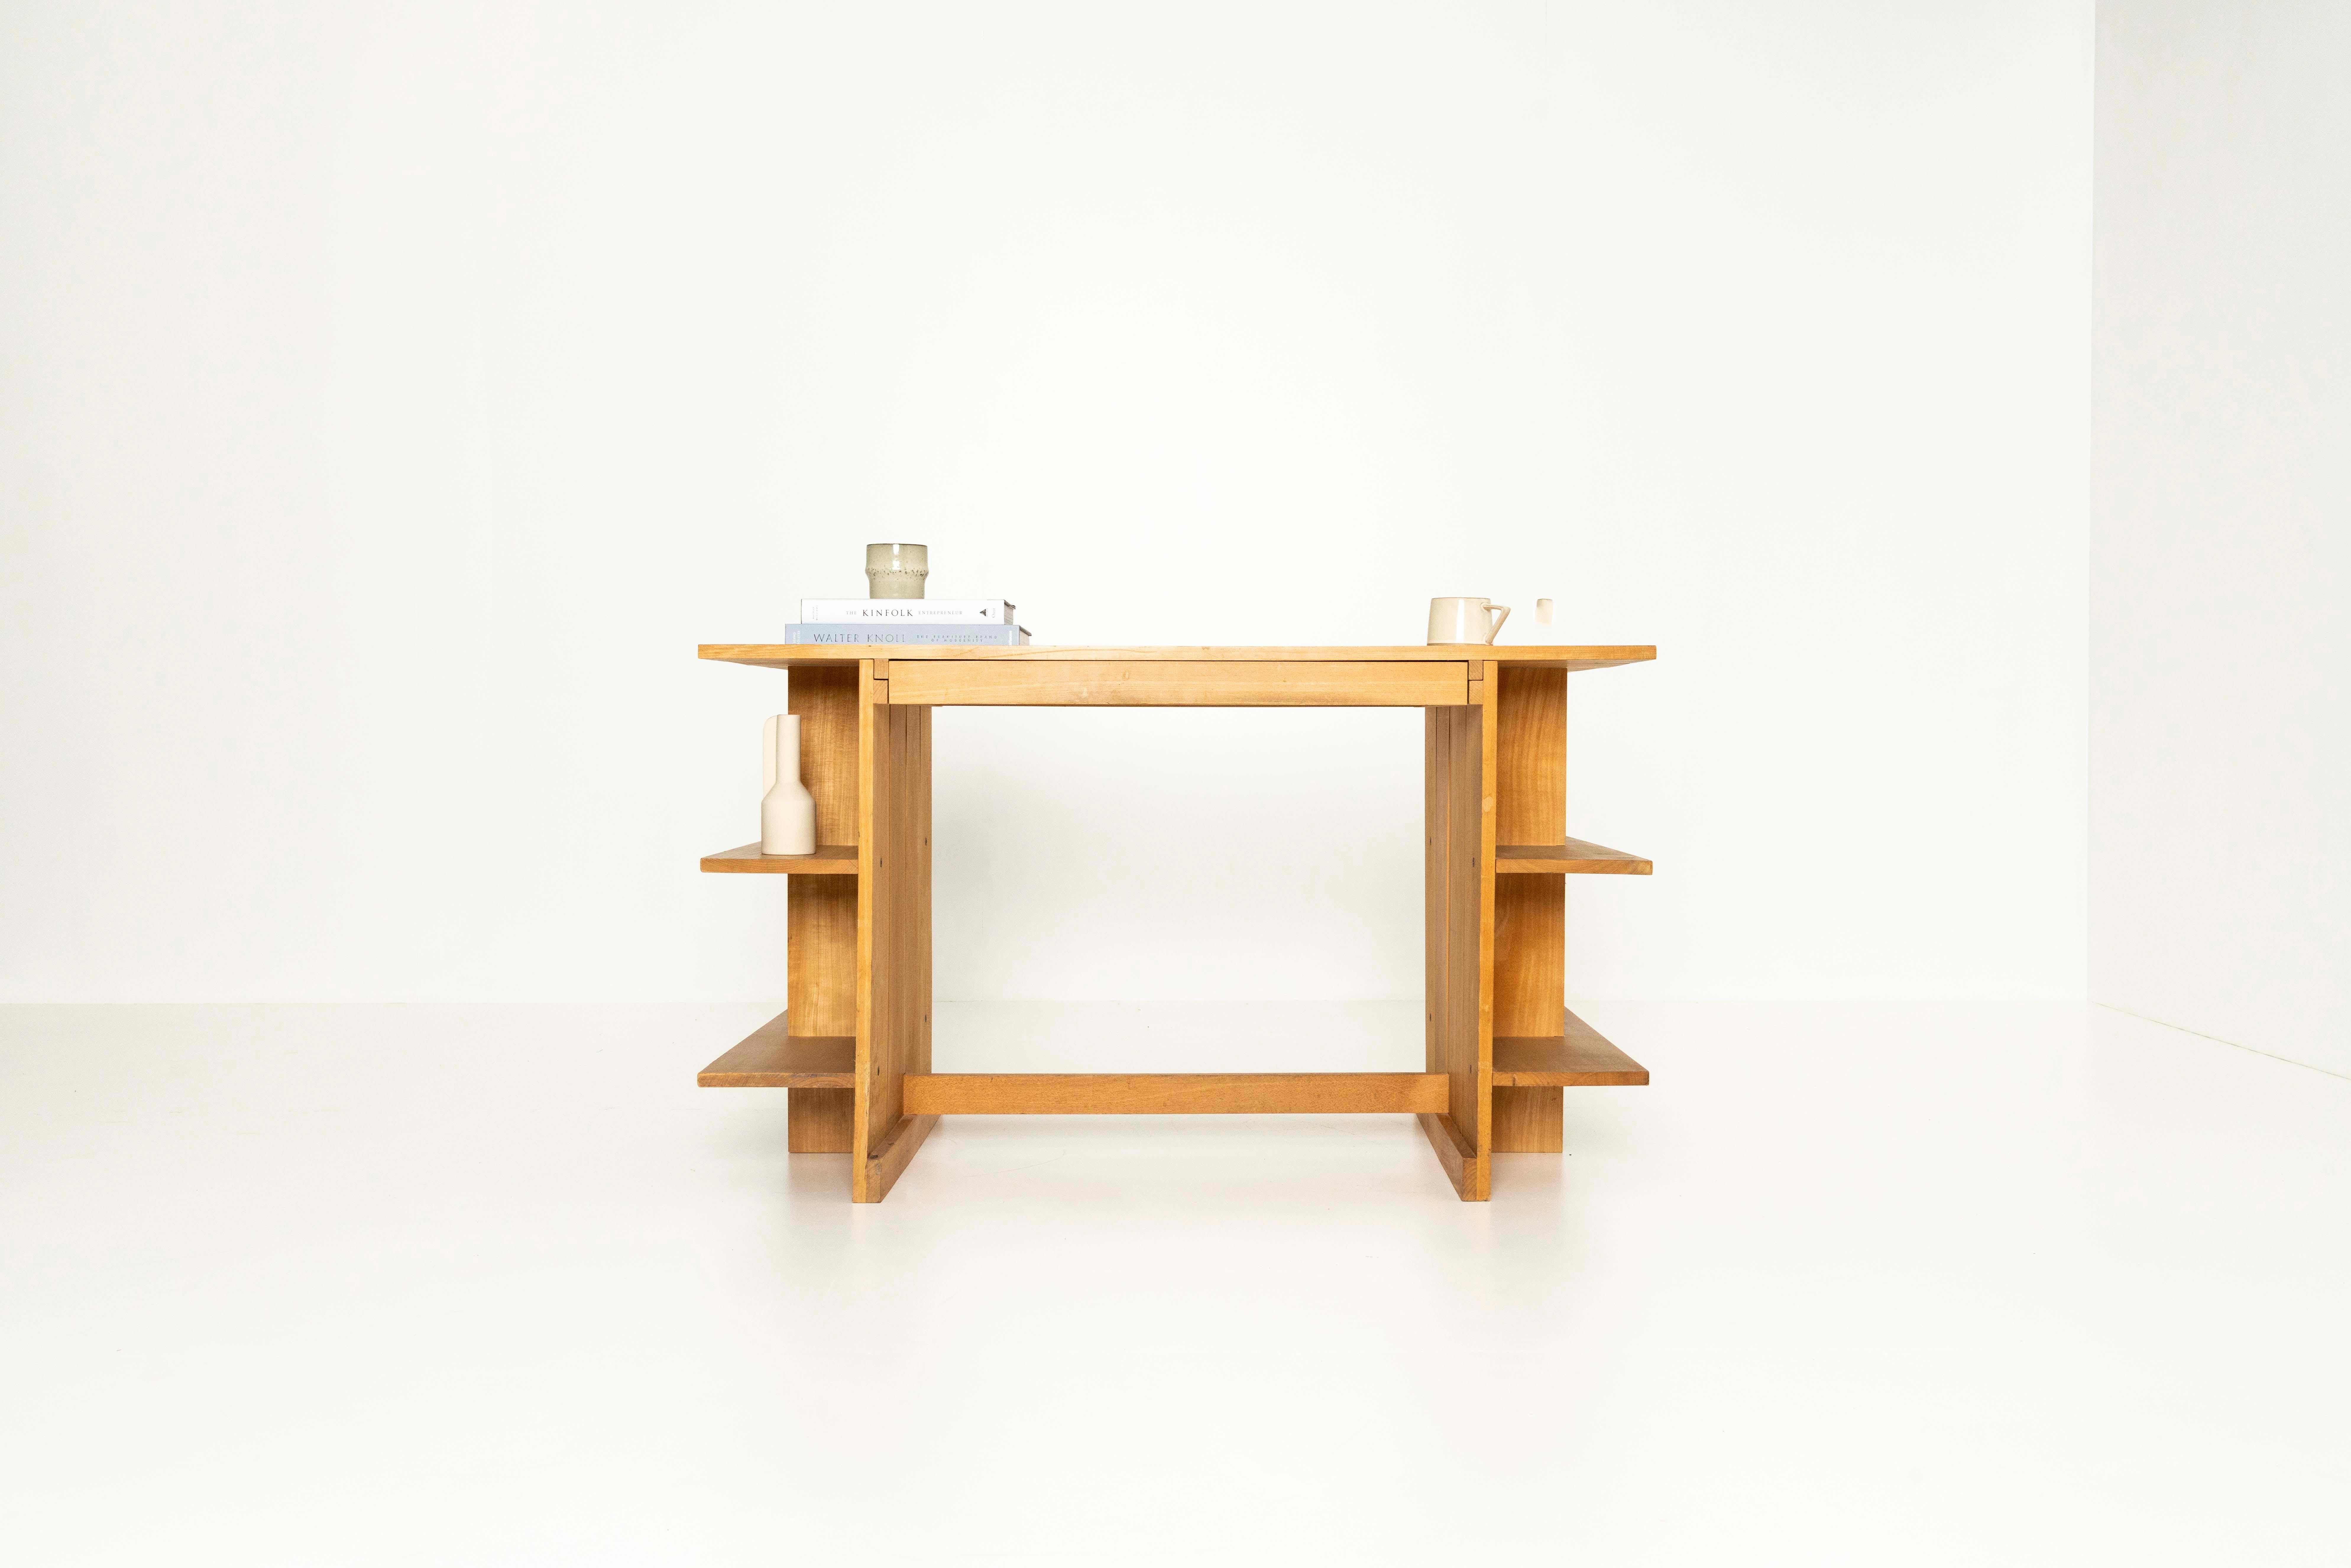 Nice Gerrit Rietveld 'Crate' desk'. This desk is designed in 1934, however, we think this is a Cassina edition from the 1970s. This desk is made out of ash wood and has a colorless lacquer. 

'Gerrit Rietveld designed the 'crate' series of